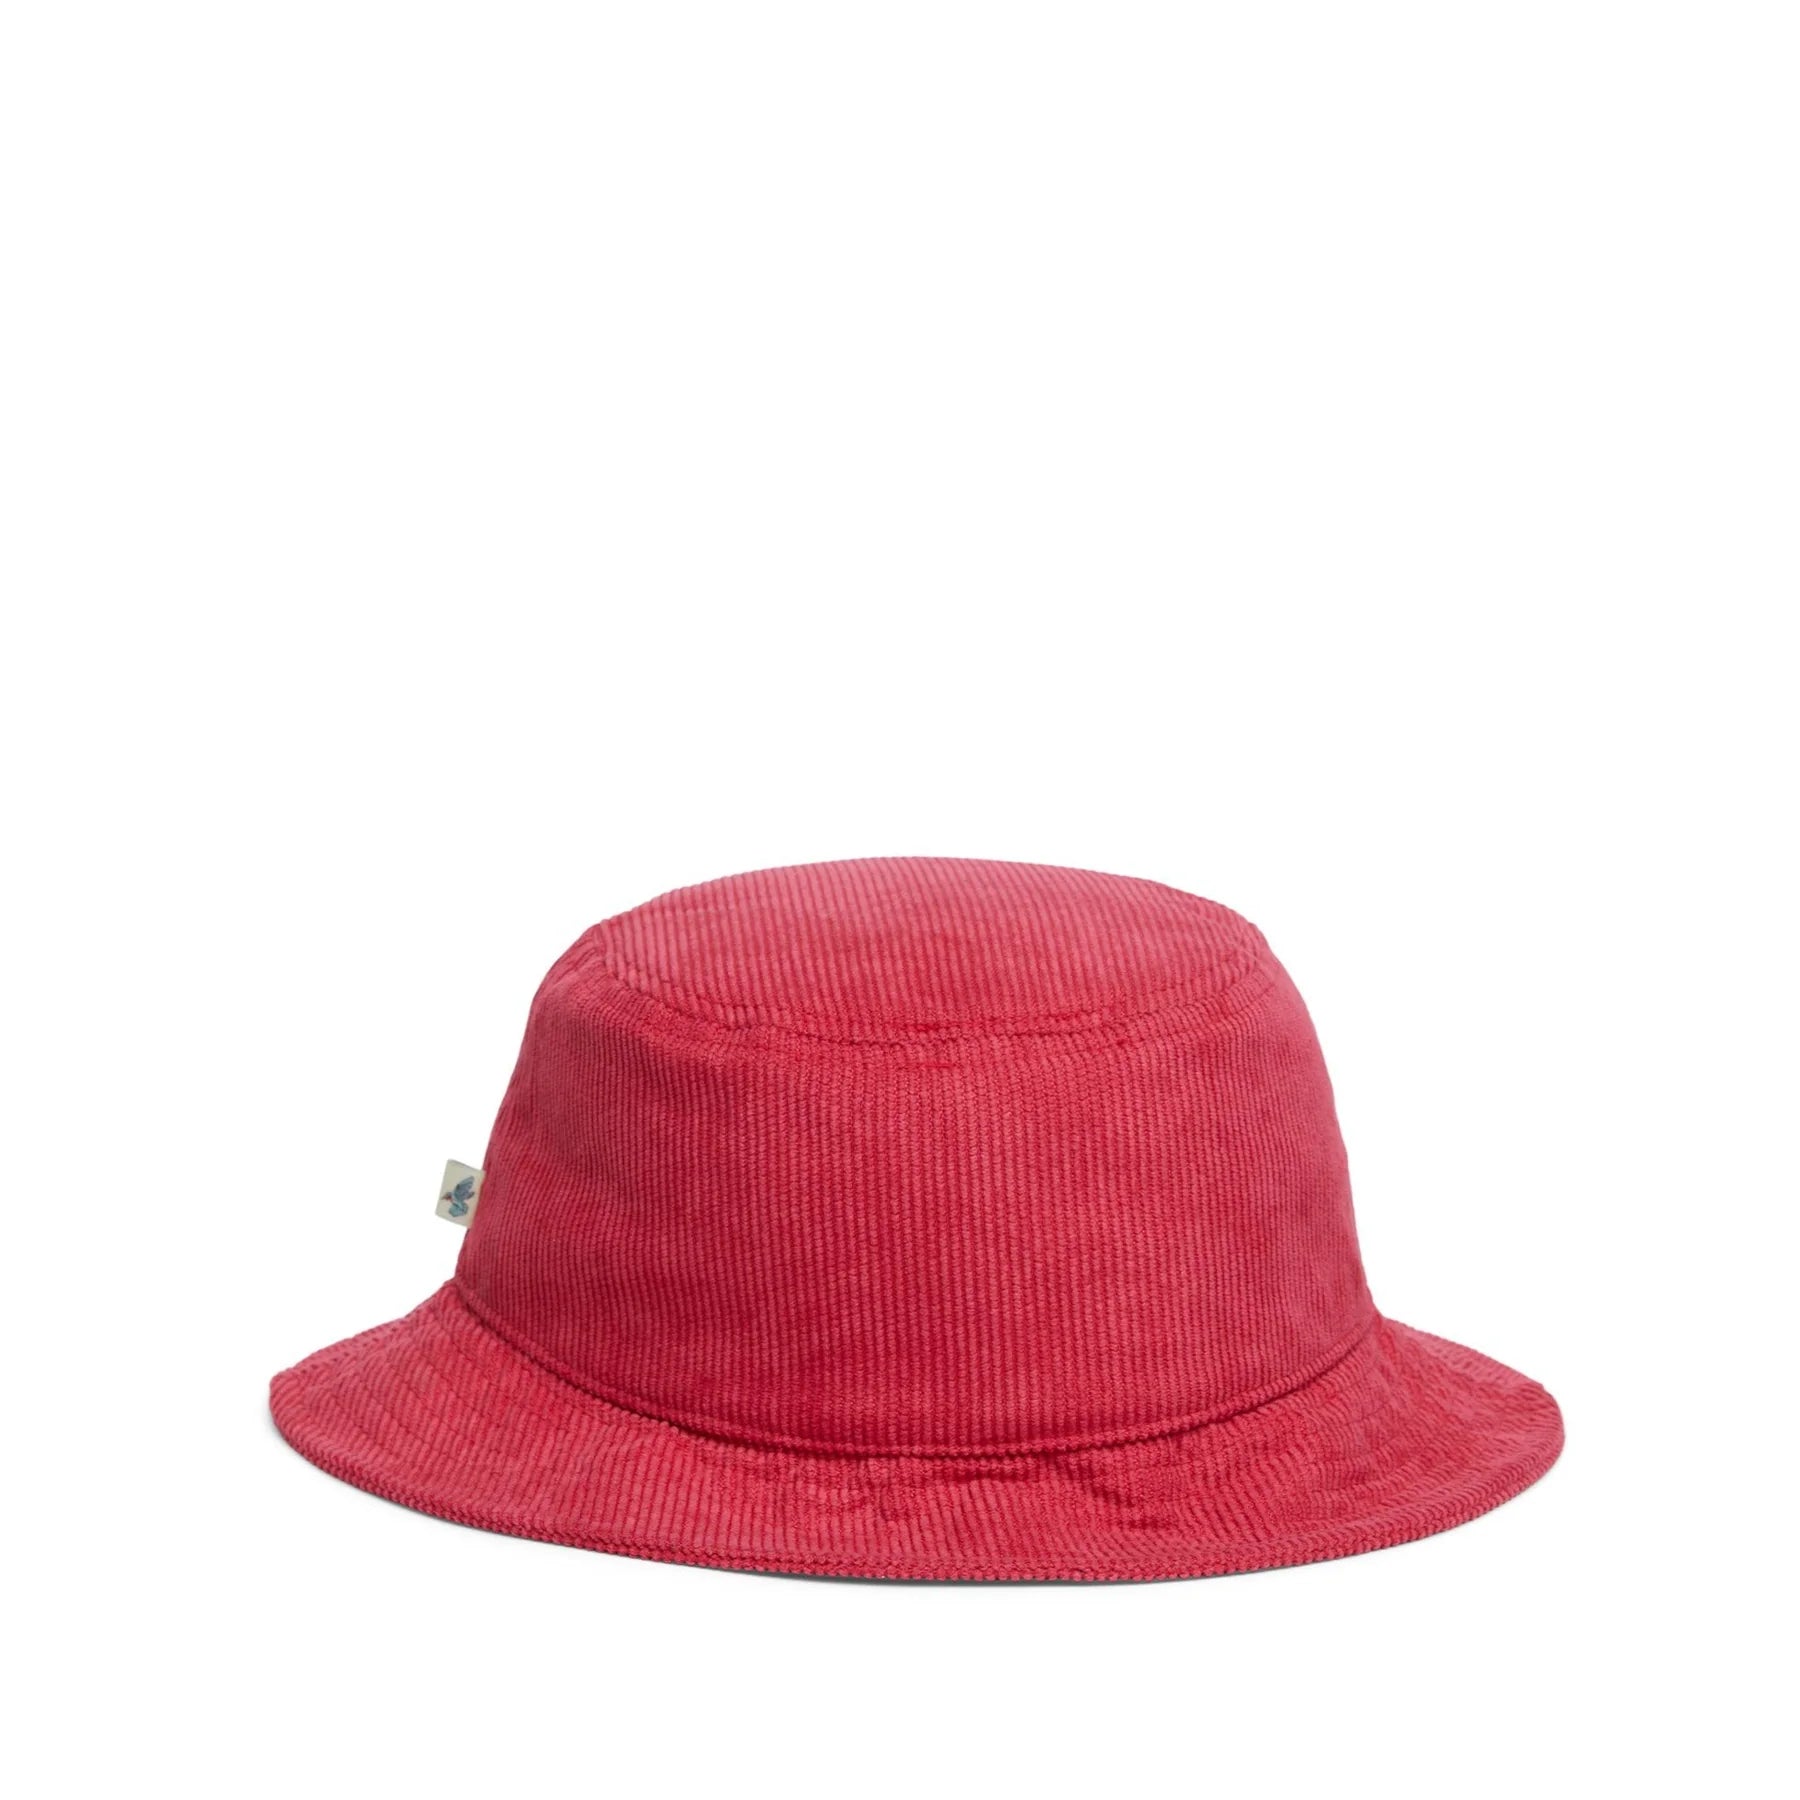 'YOU ARE ON NATIVE LAND' Corduroy Bucket Hat